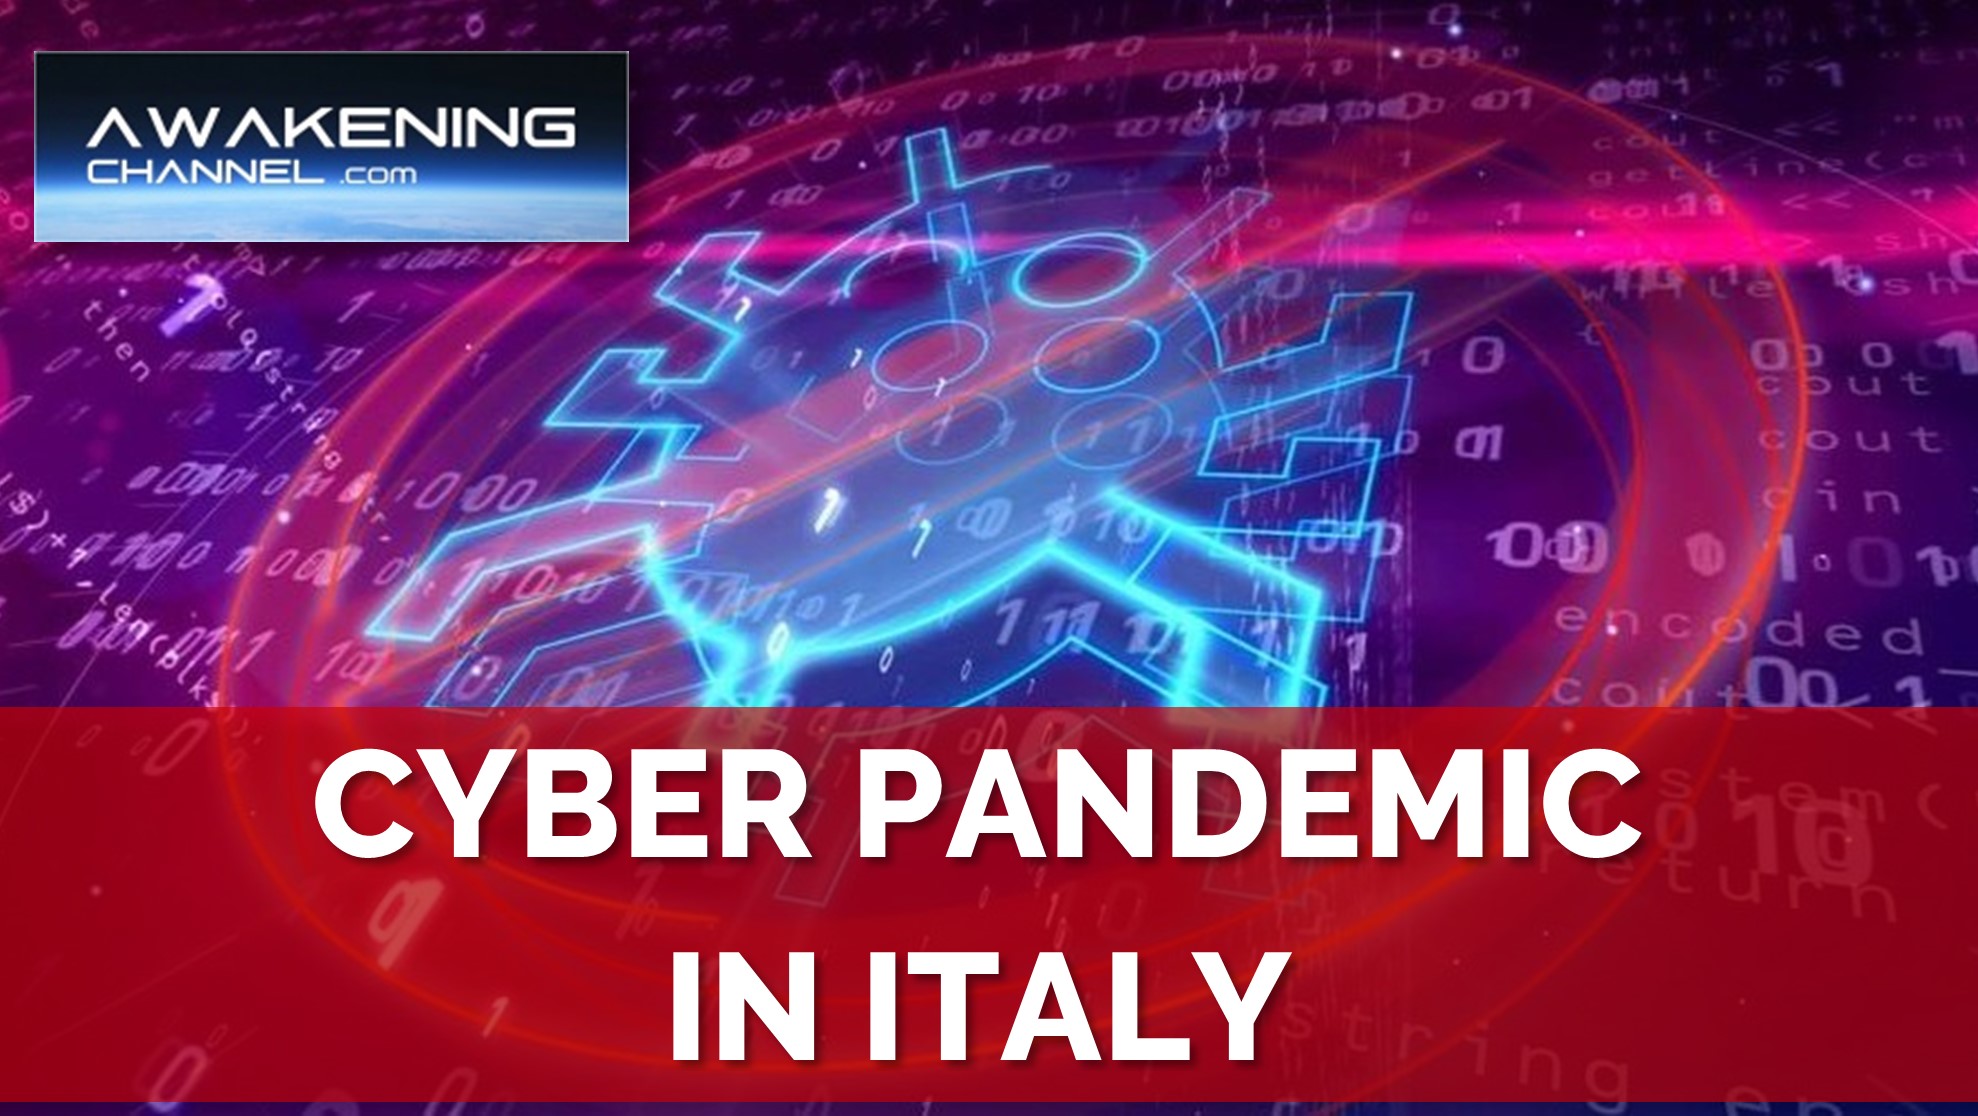 CYBER PANDEMIC IN ITALY